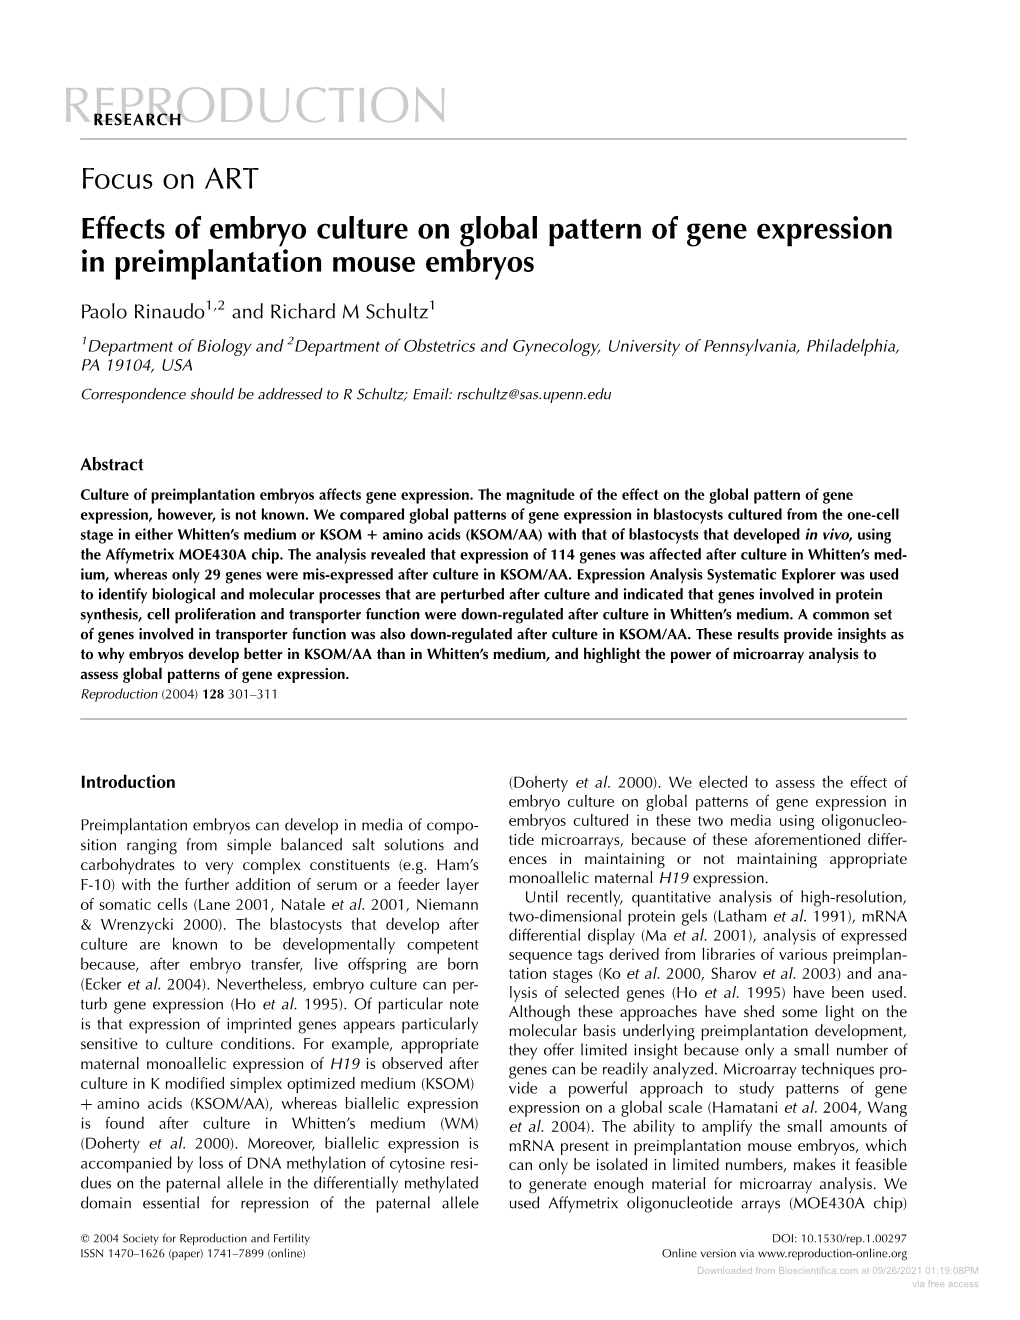 Focus on ART Effects of Embryo Culture on Global Pattern of Gene Expression in Preimplantation Mouse Embryos